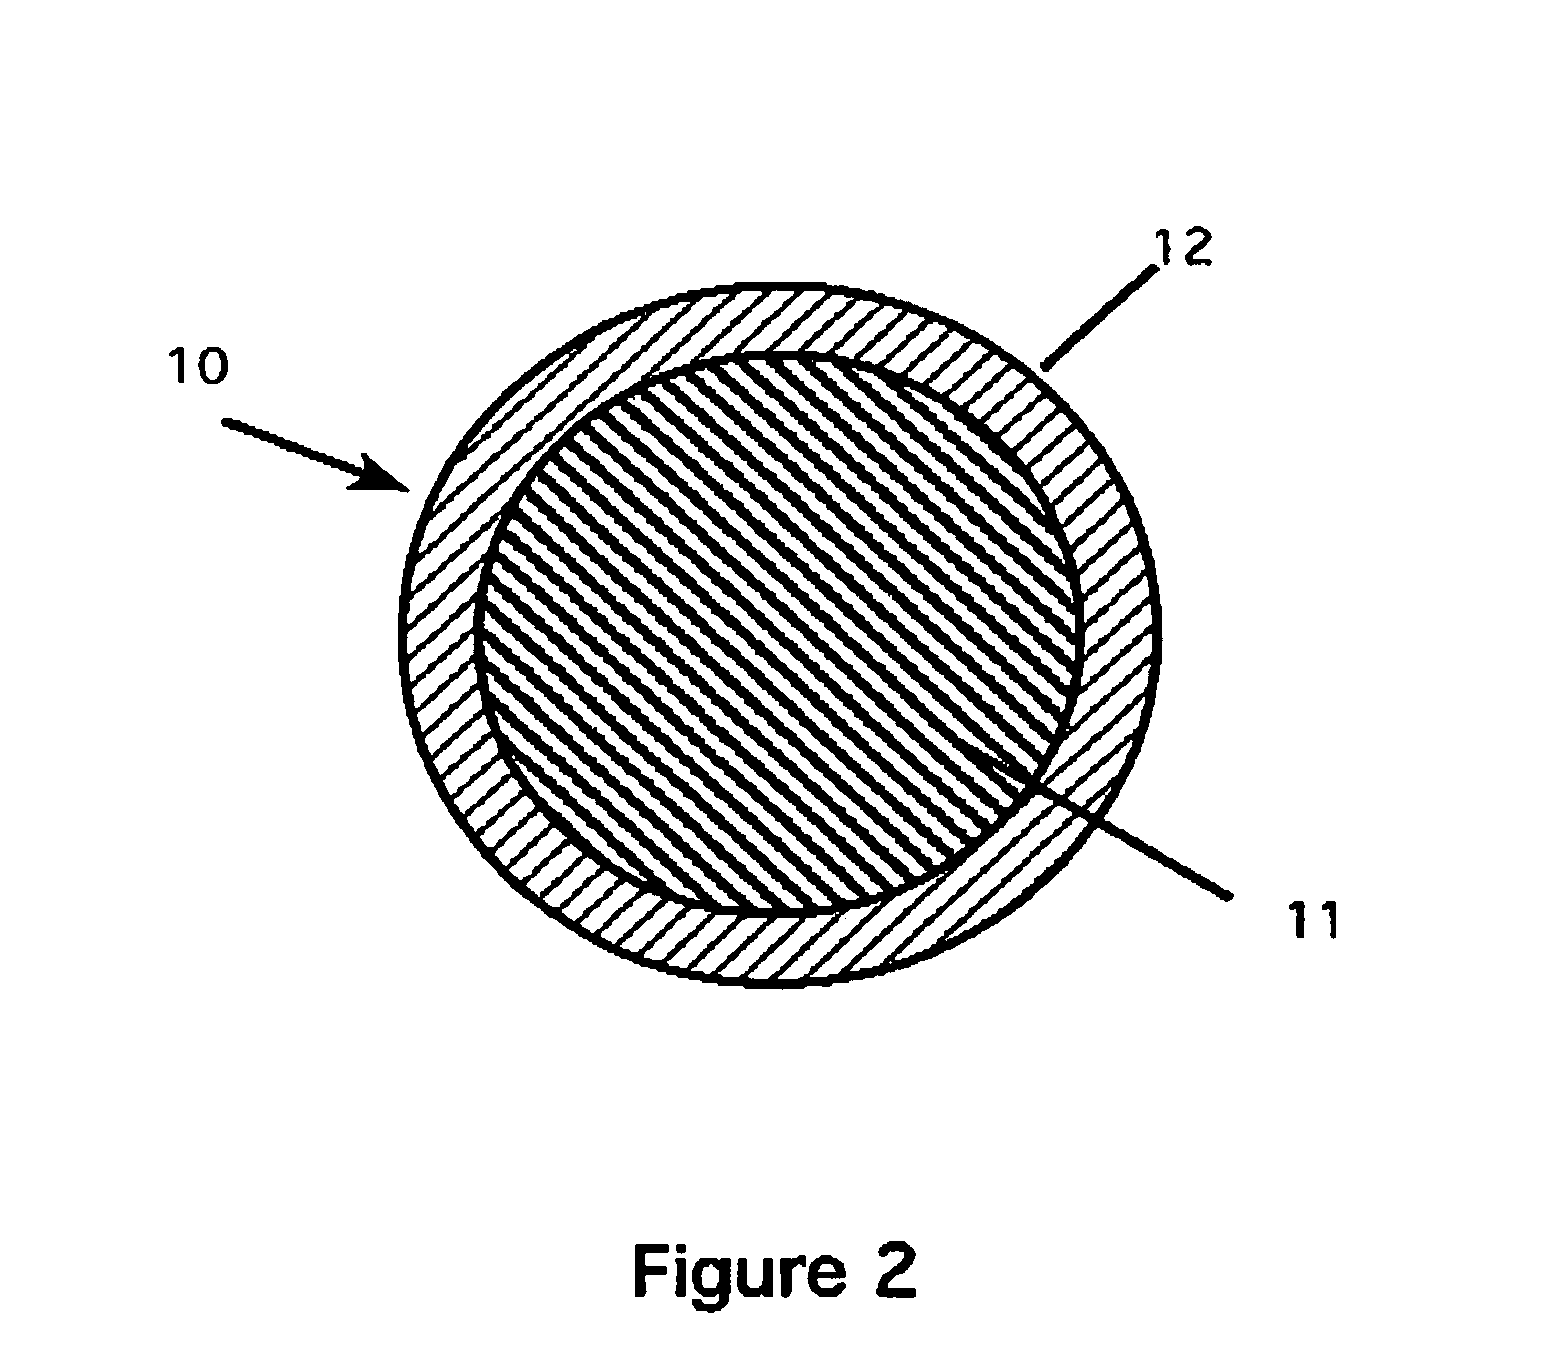 Method of making an environmentally safe substitute for lead shot